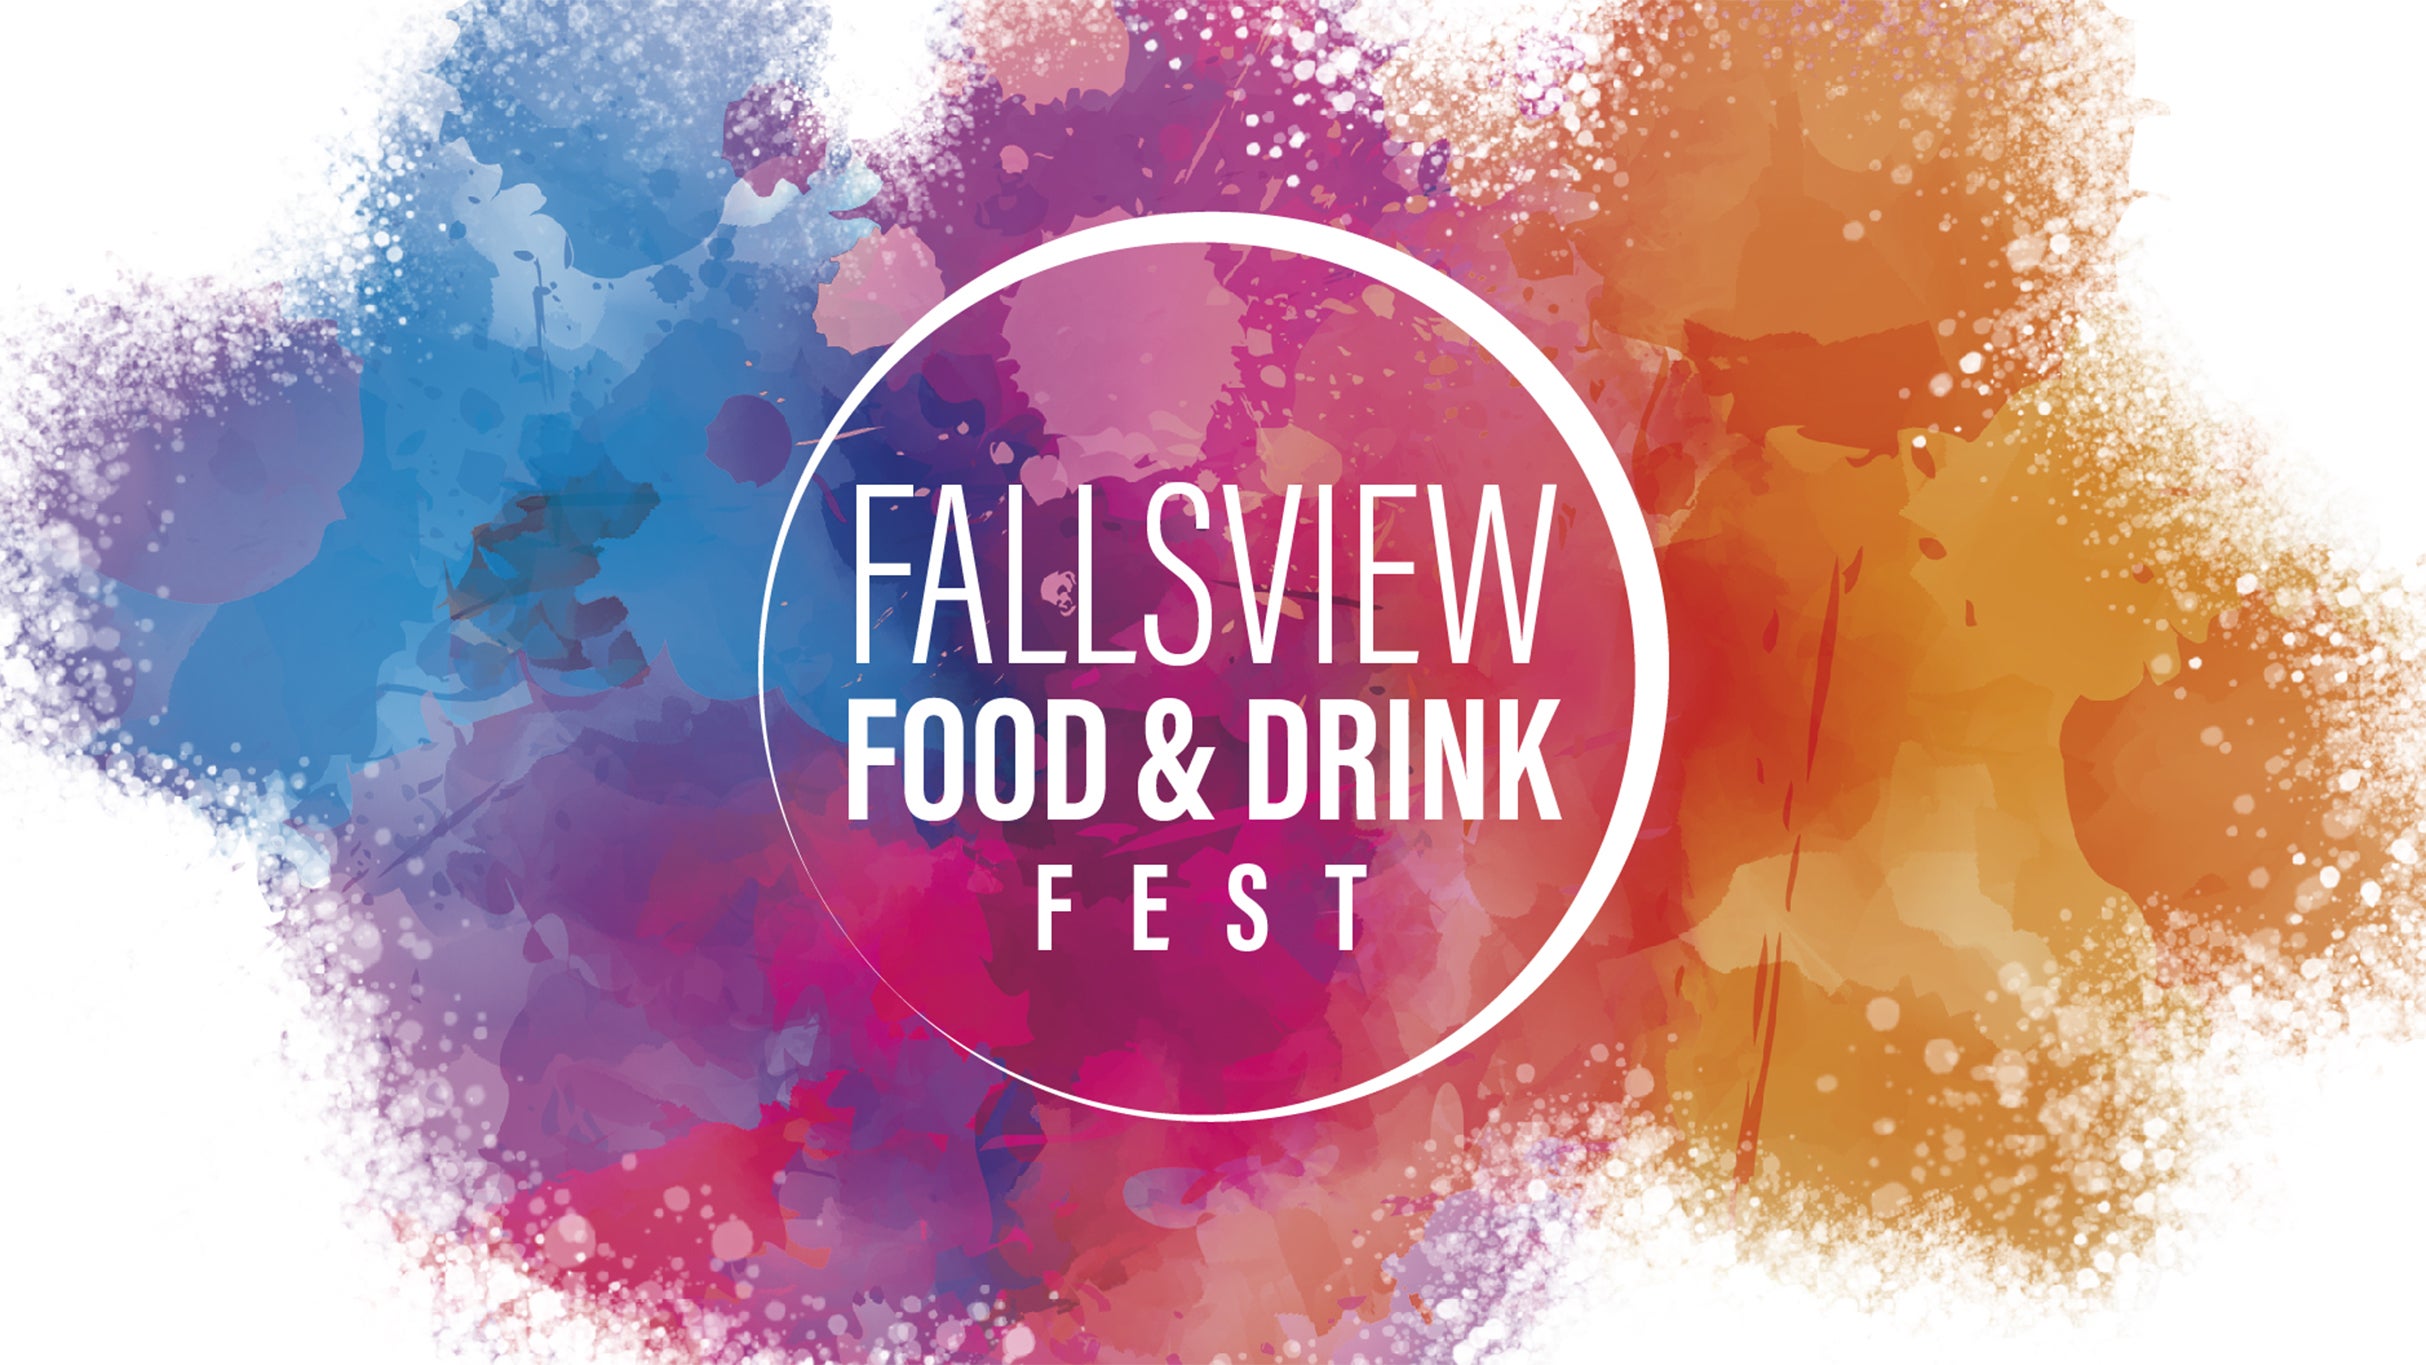 Fallsview Food & Drink Fest - Fallsview Food Con presale password for advance tickets in Niagara Falls